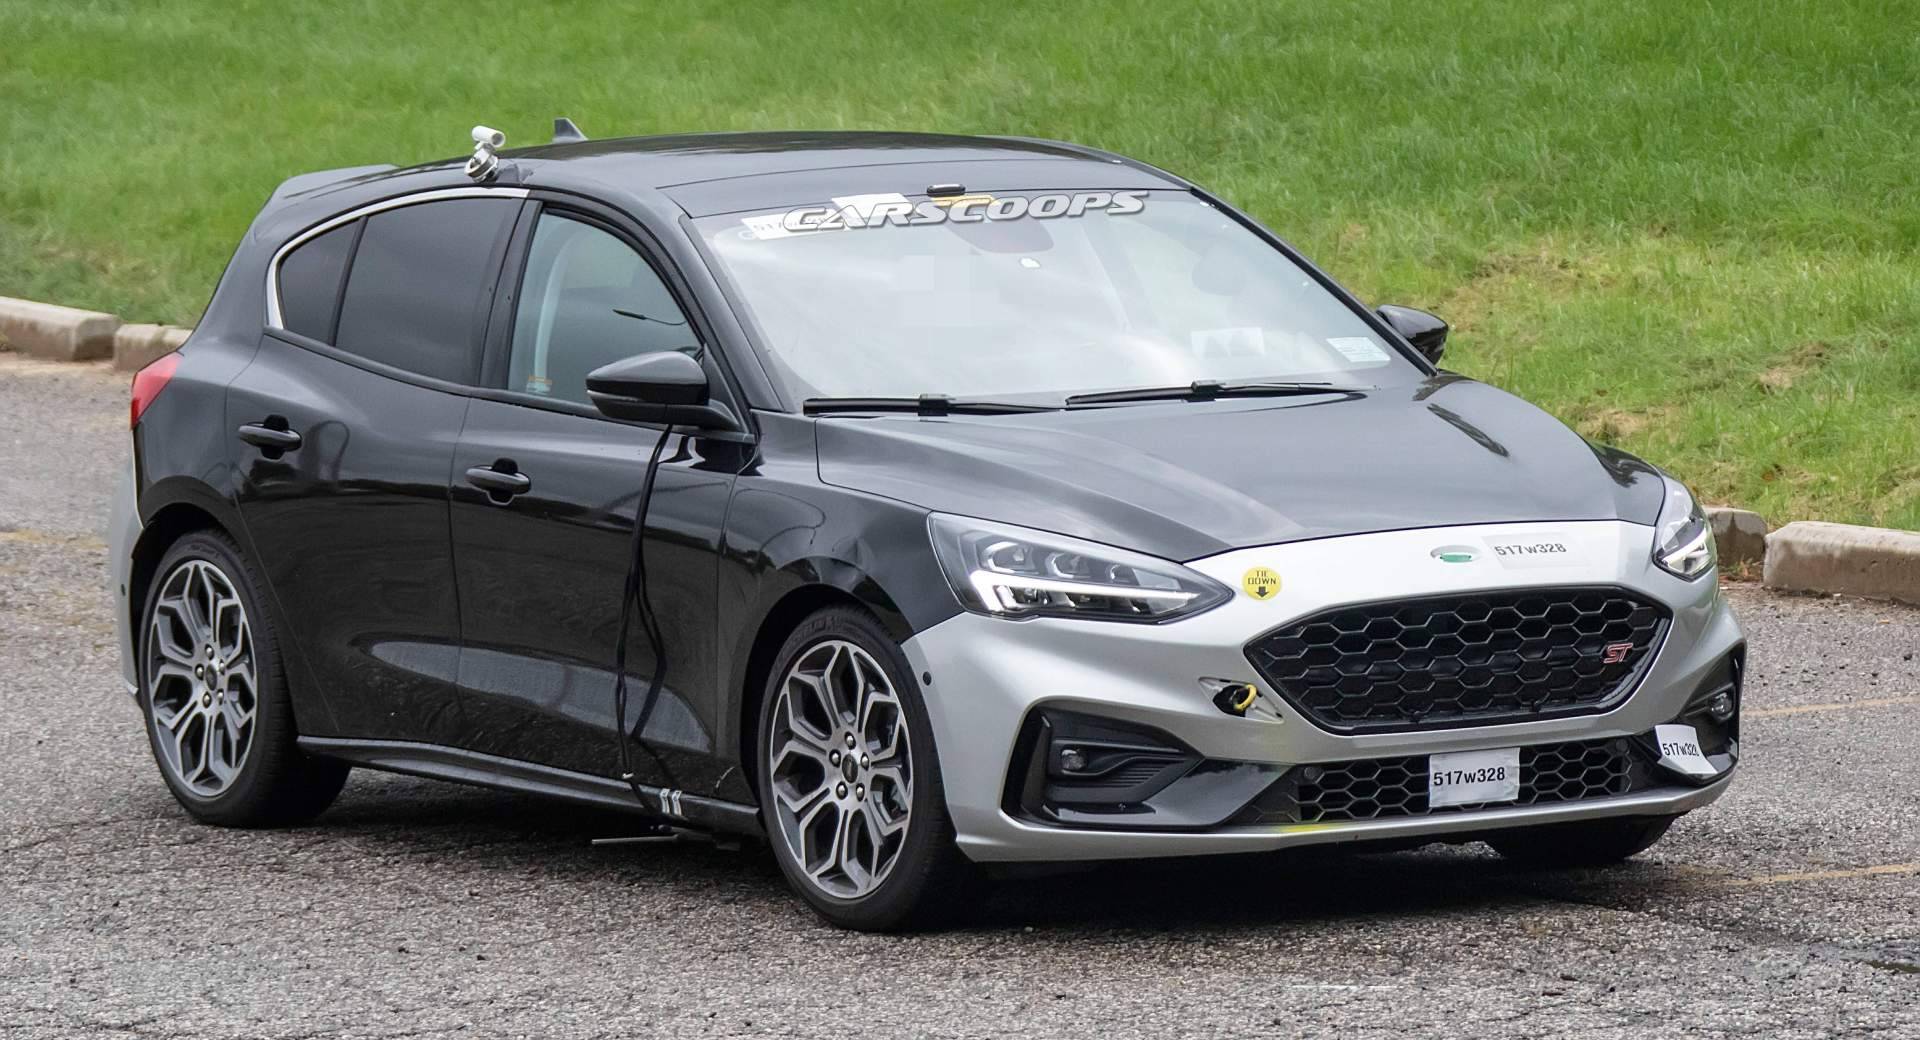 2019 Ford Focus ST Spotted In The U.S. With No Camo At All